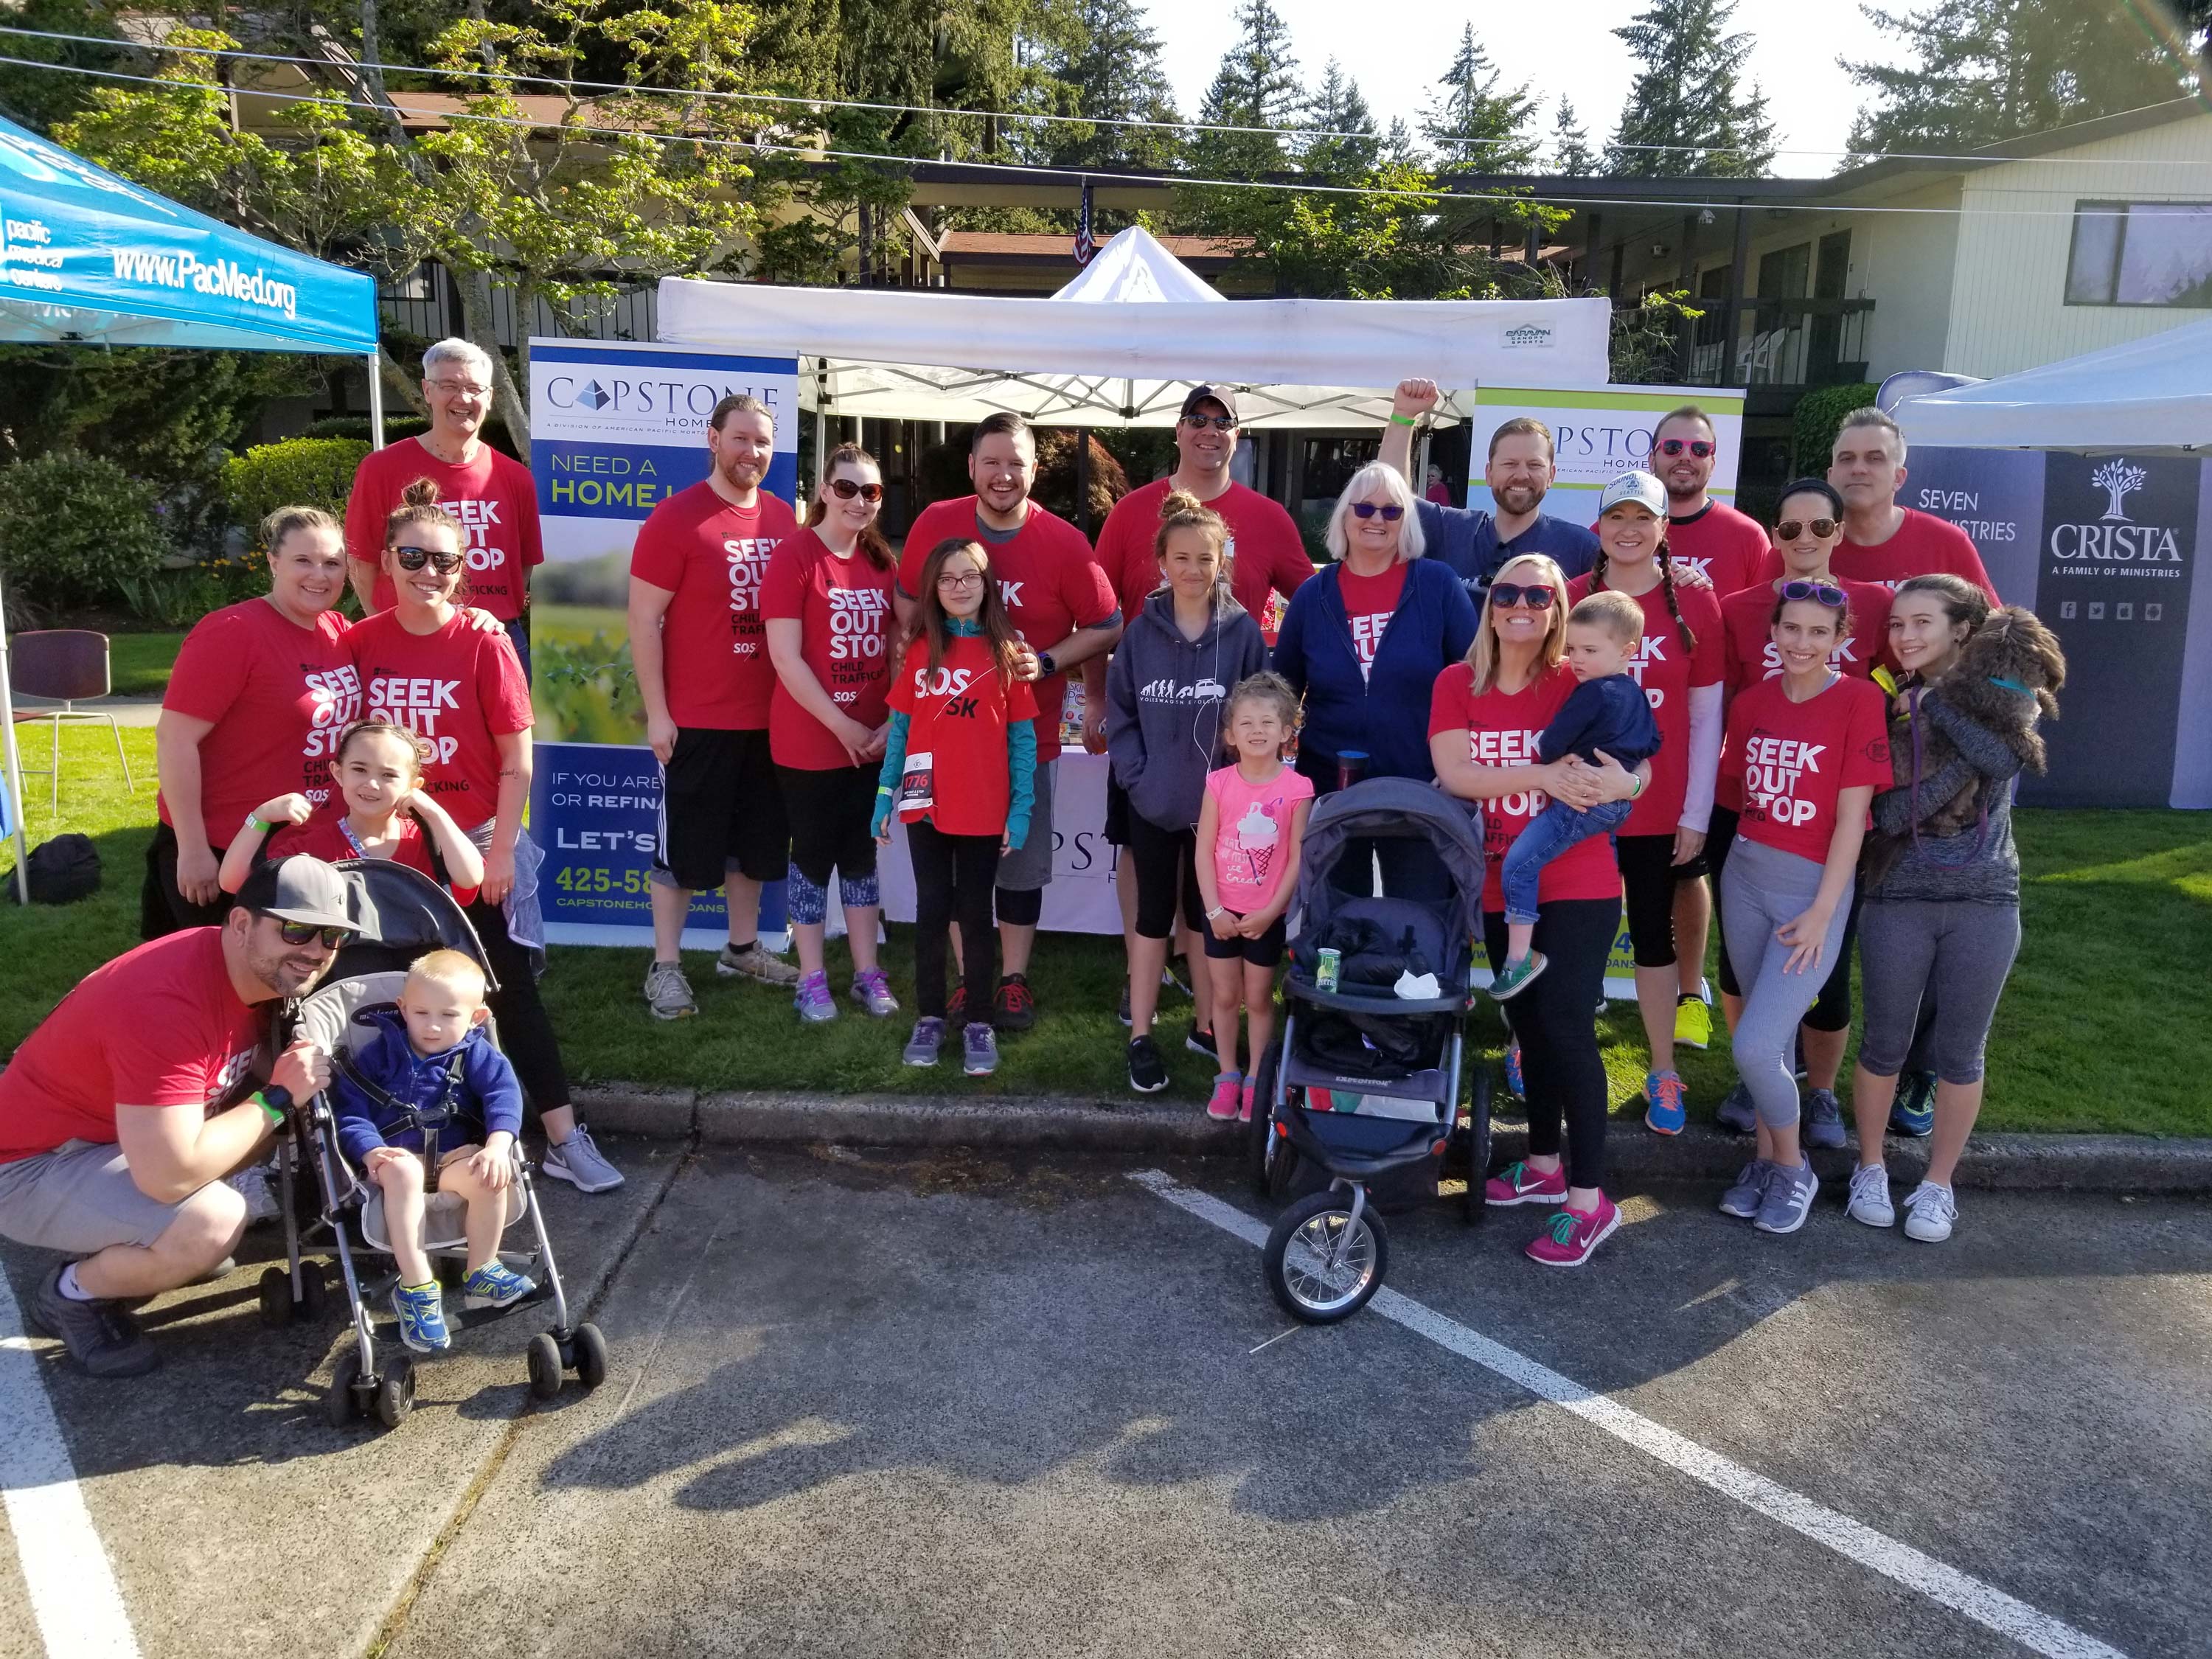 Capstone Home Loans staff and their families have joined and supported World Concern's Free Them 5k for years